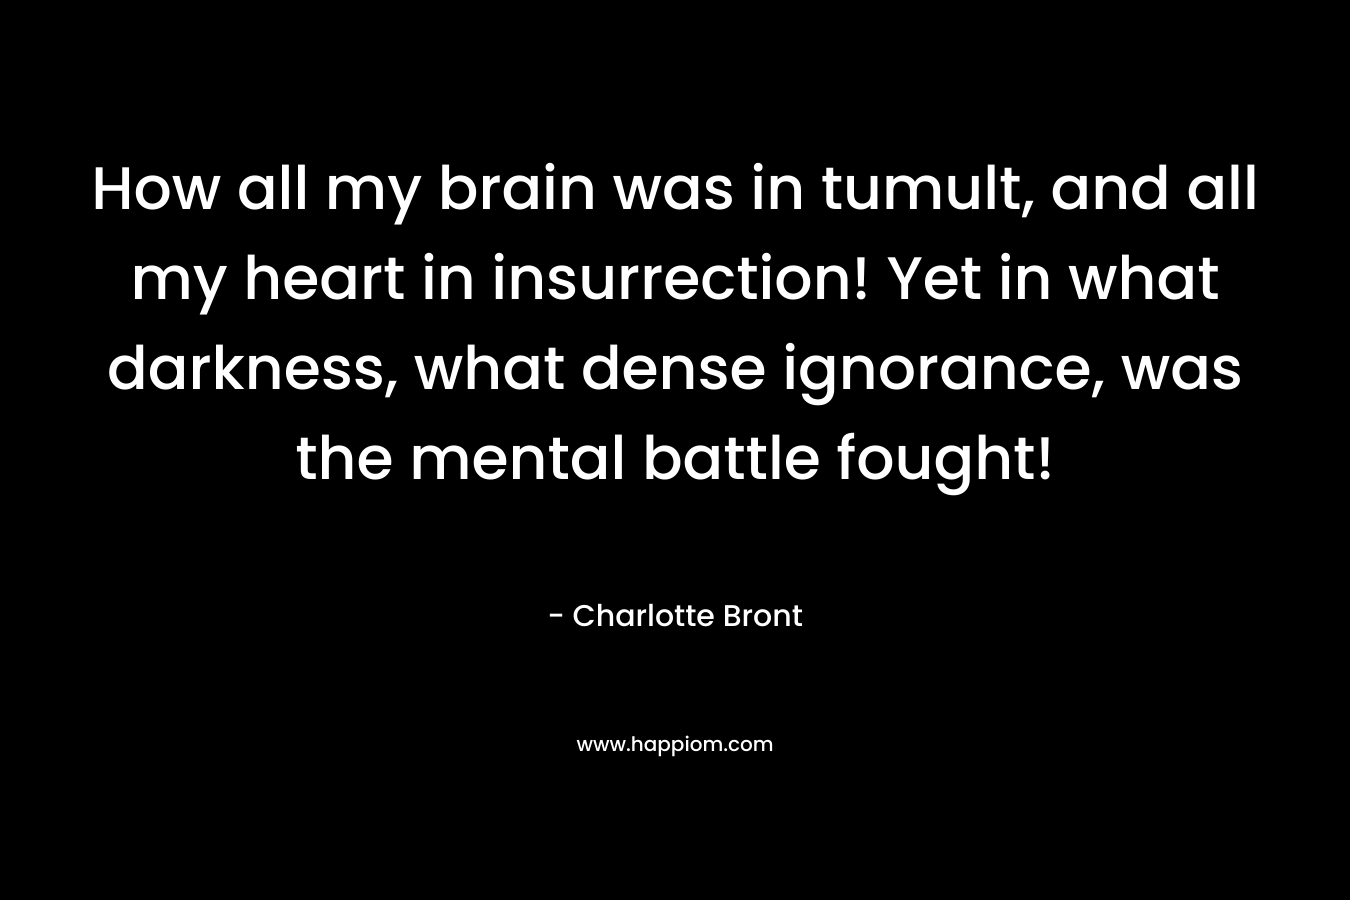 How all my brain was in tumult, and all my heart in insurrection! Yet in what darkness, what dense ignorance, was the mental battle fought!